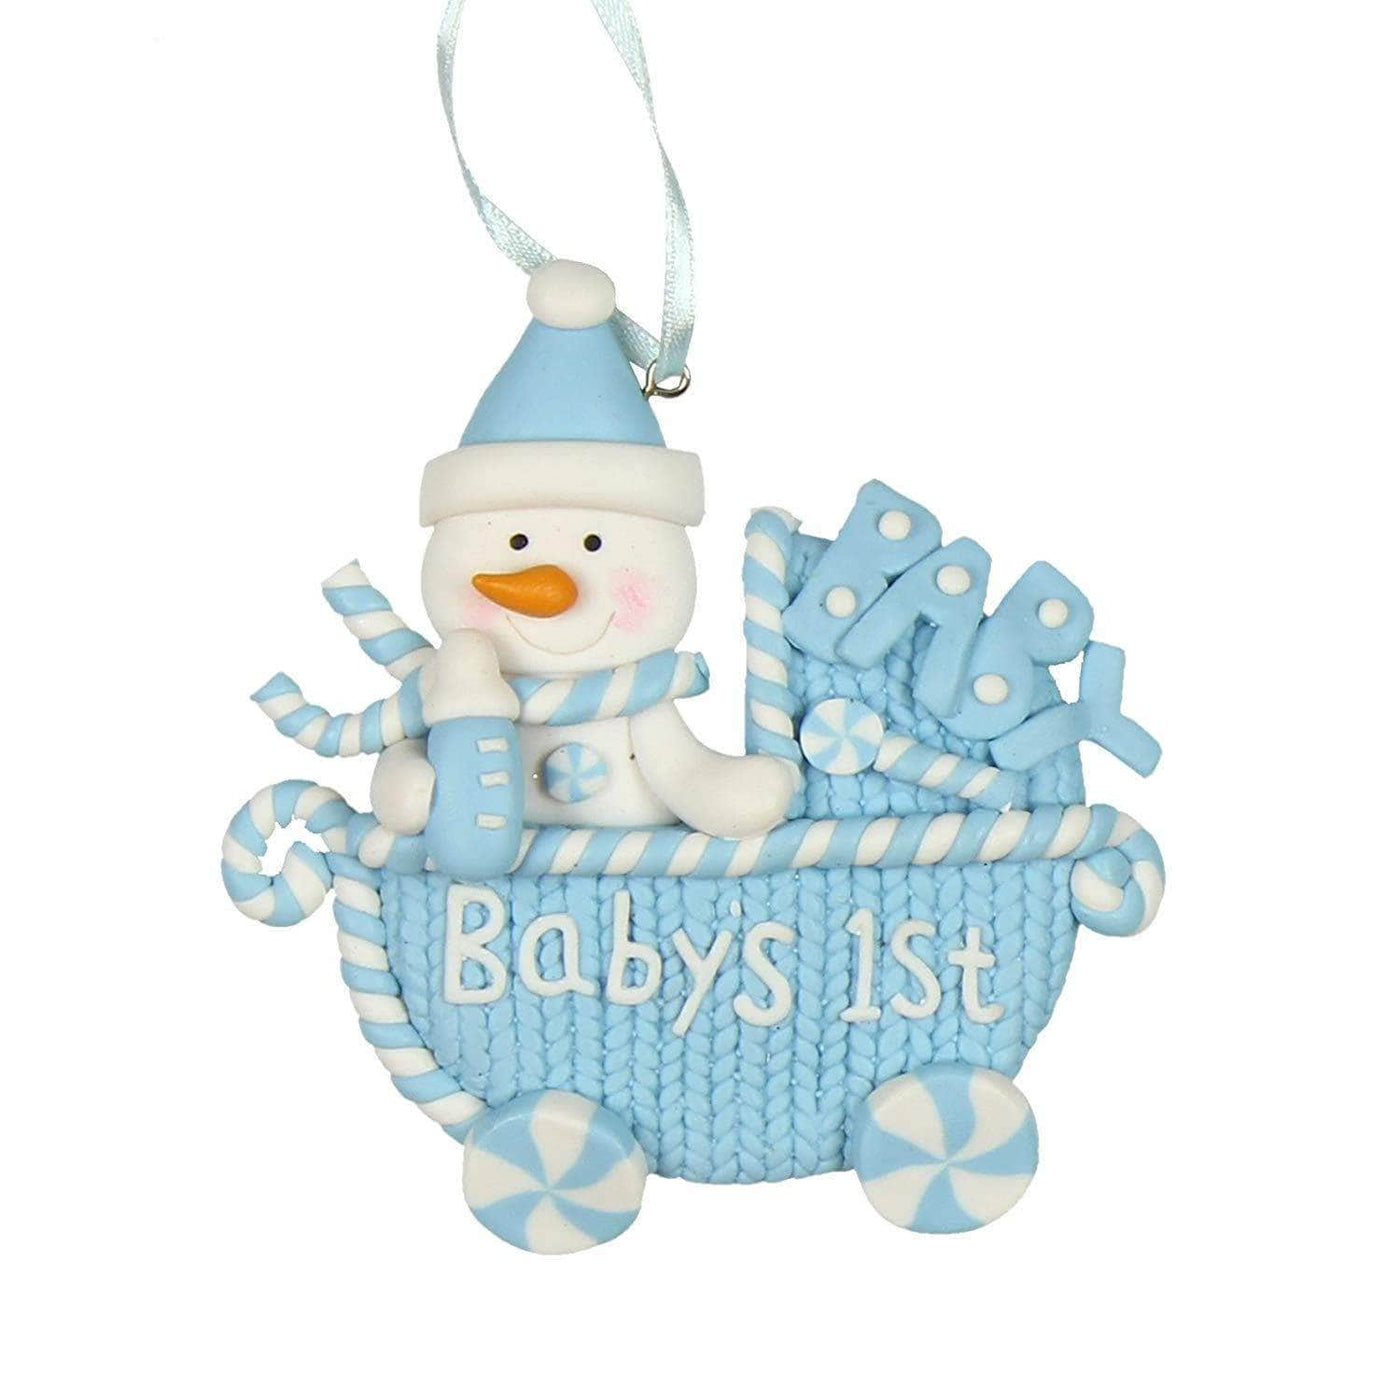 Widdop Gifts Christmas Decorations Boys Baby's 1st Christmas Hanging Pram Decoration